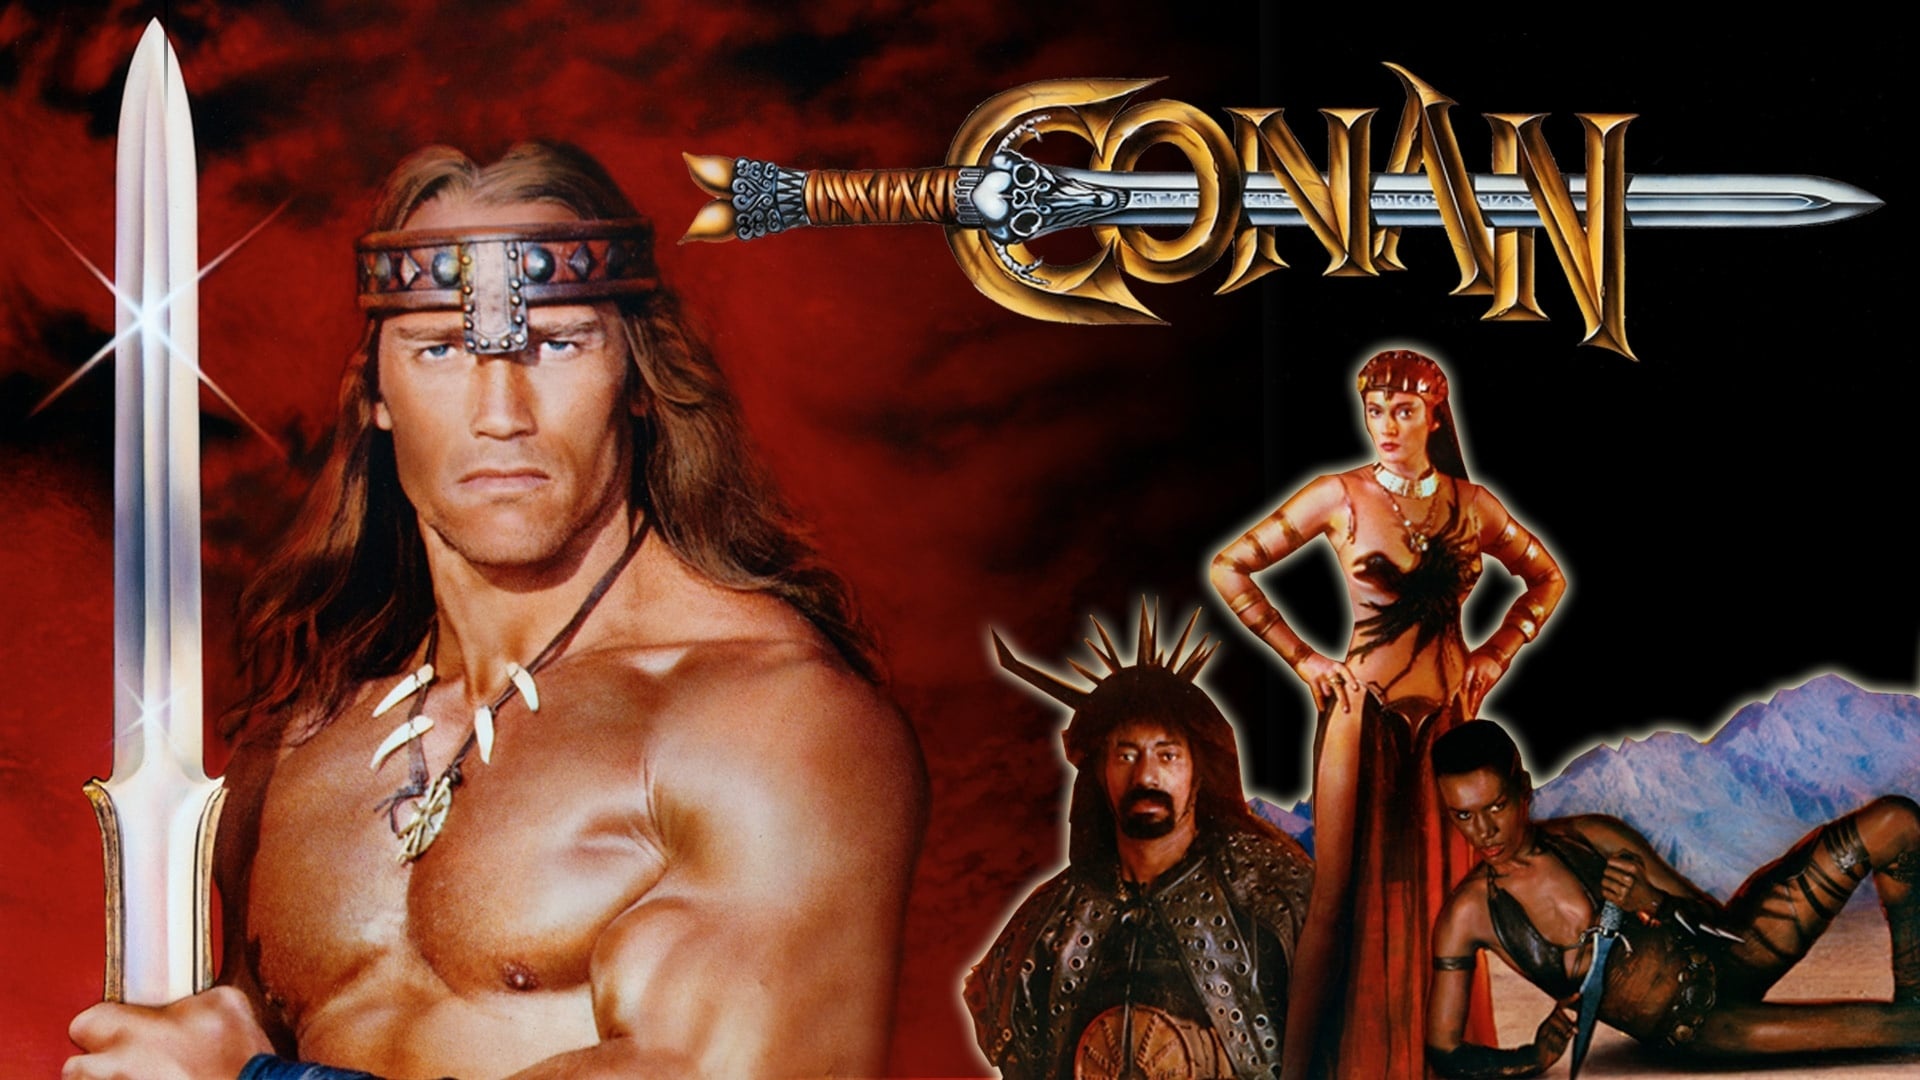 Conan the Destroyer, Movie wallpapers, High definition, Poster collection, 1920x1080 Full HD Desktop